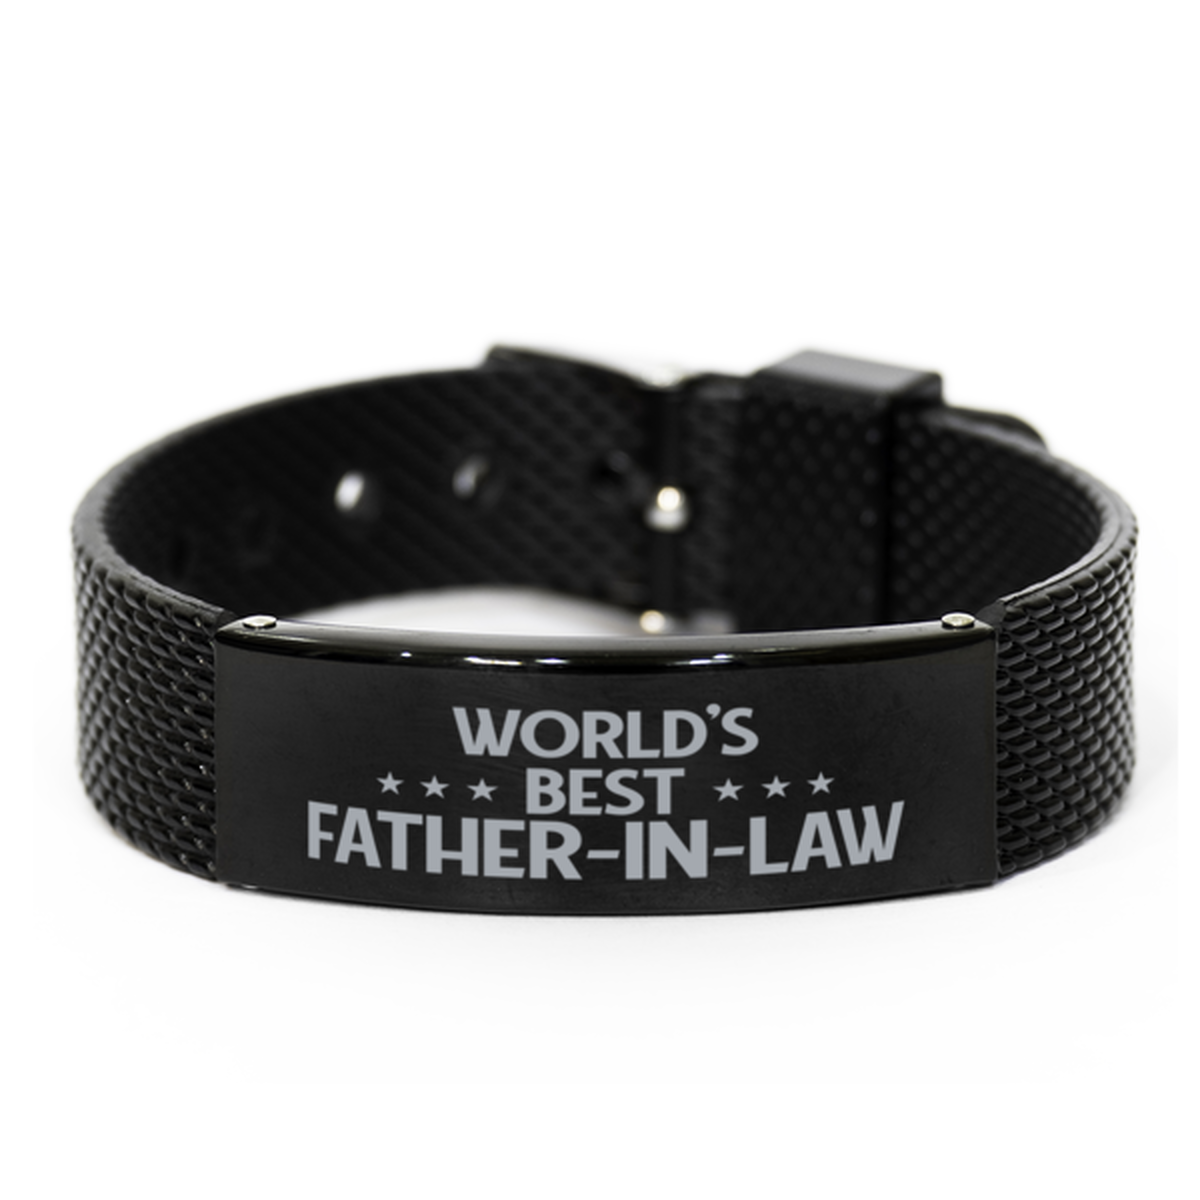 World's Best Father-in-law Gifts, Gag Engraved Bracelet For Father-in-law, Best Family Gifts For Men